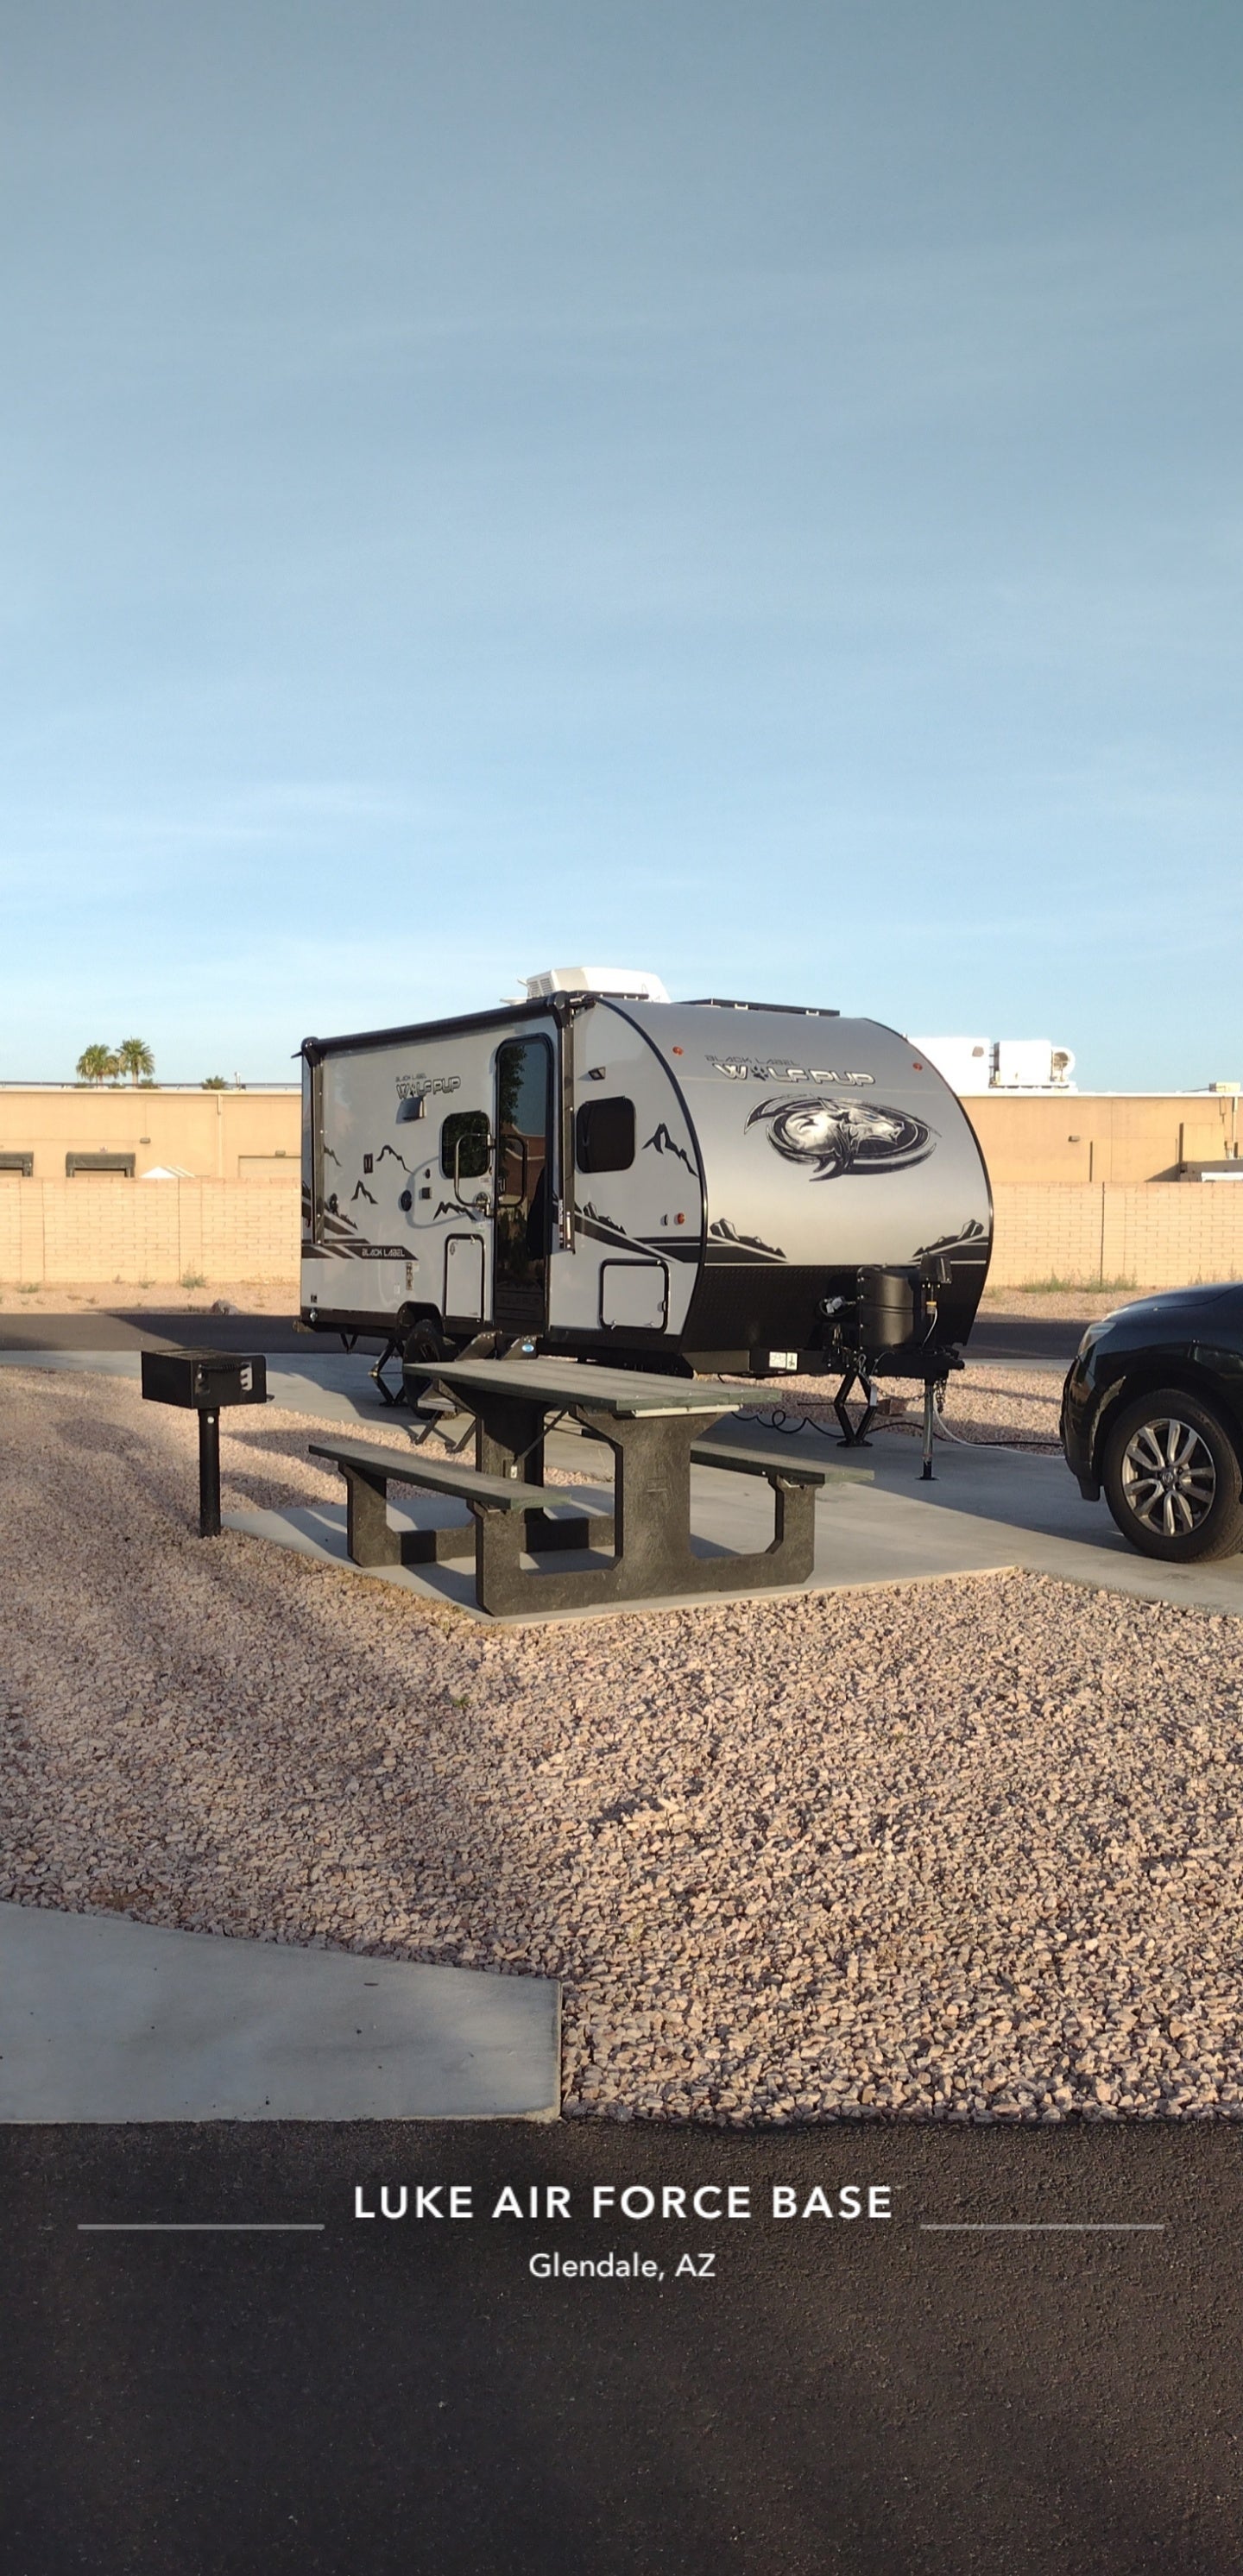 Camper submitted image from Saguaro Skies - Luke AFB Famcamp - 3